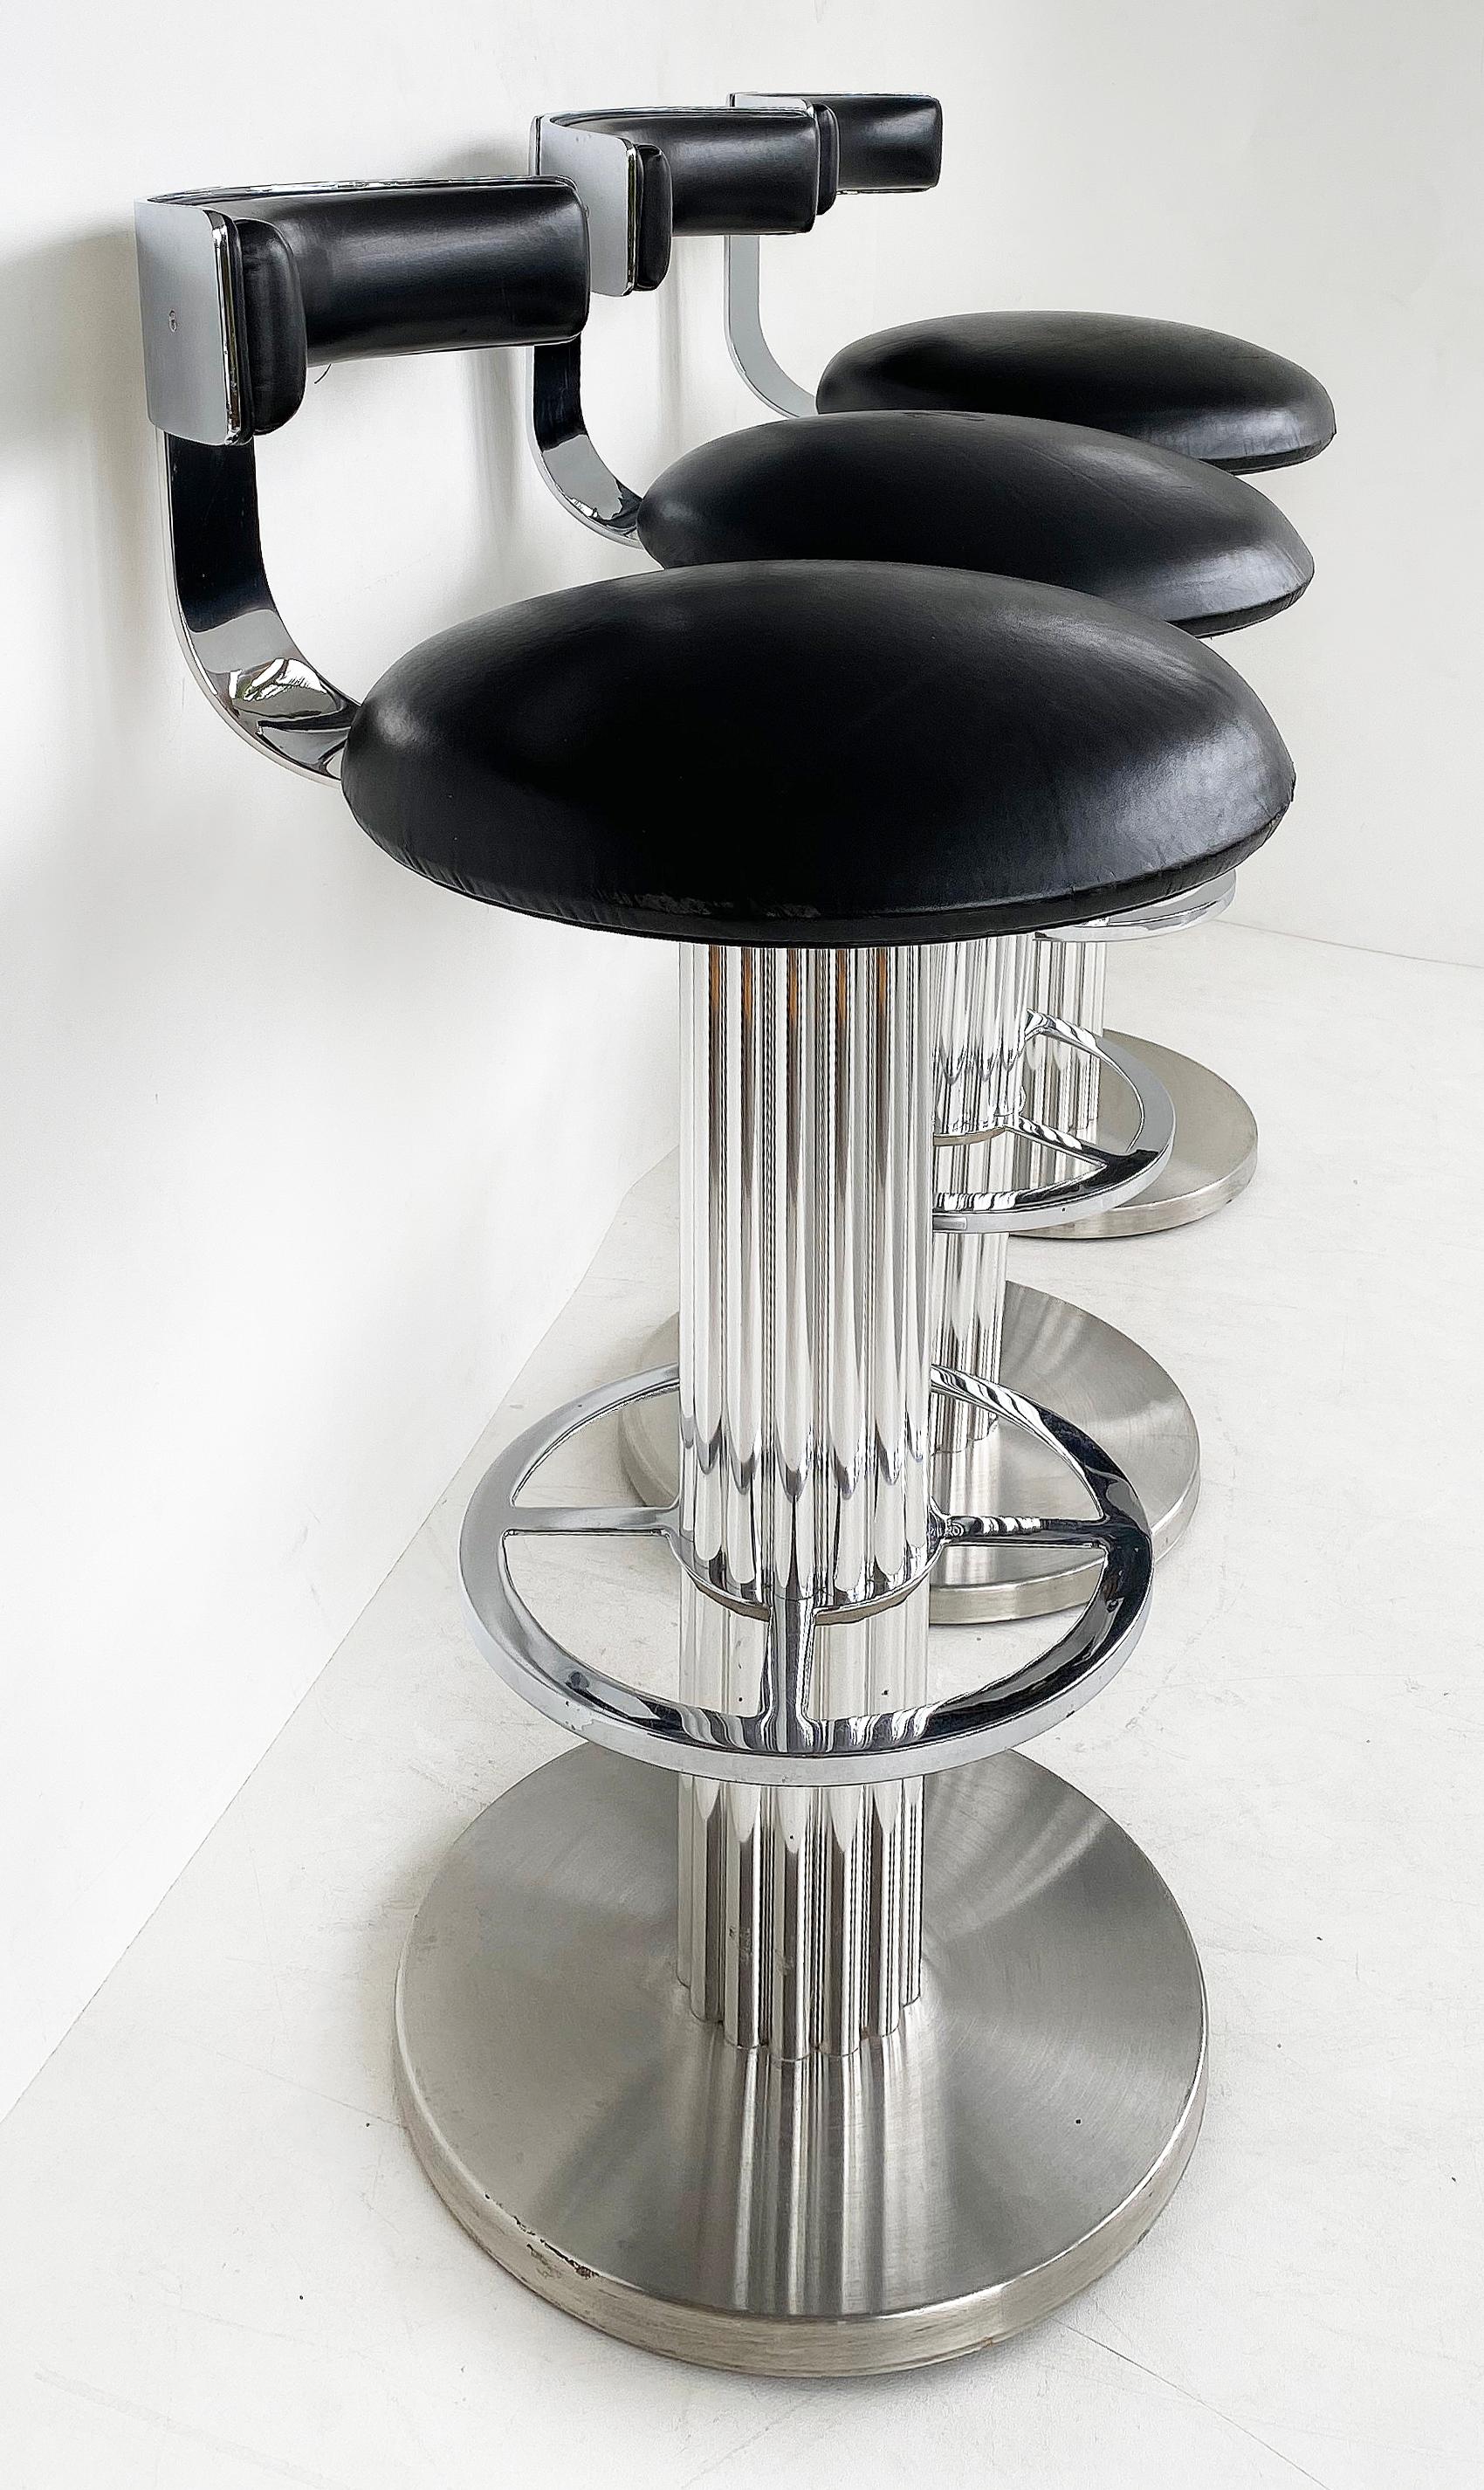 Modern Design for Leisure Swivel Bar Stools with Chrome, Nickeled Steel, Black Leather